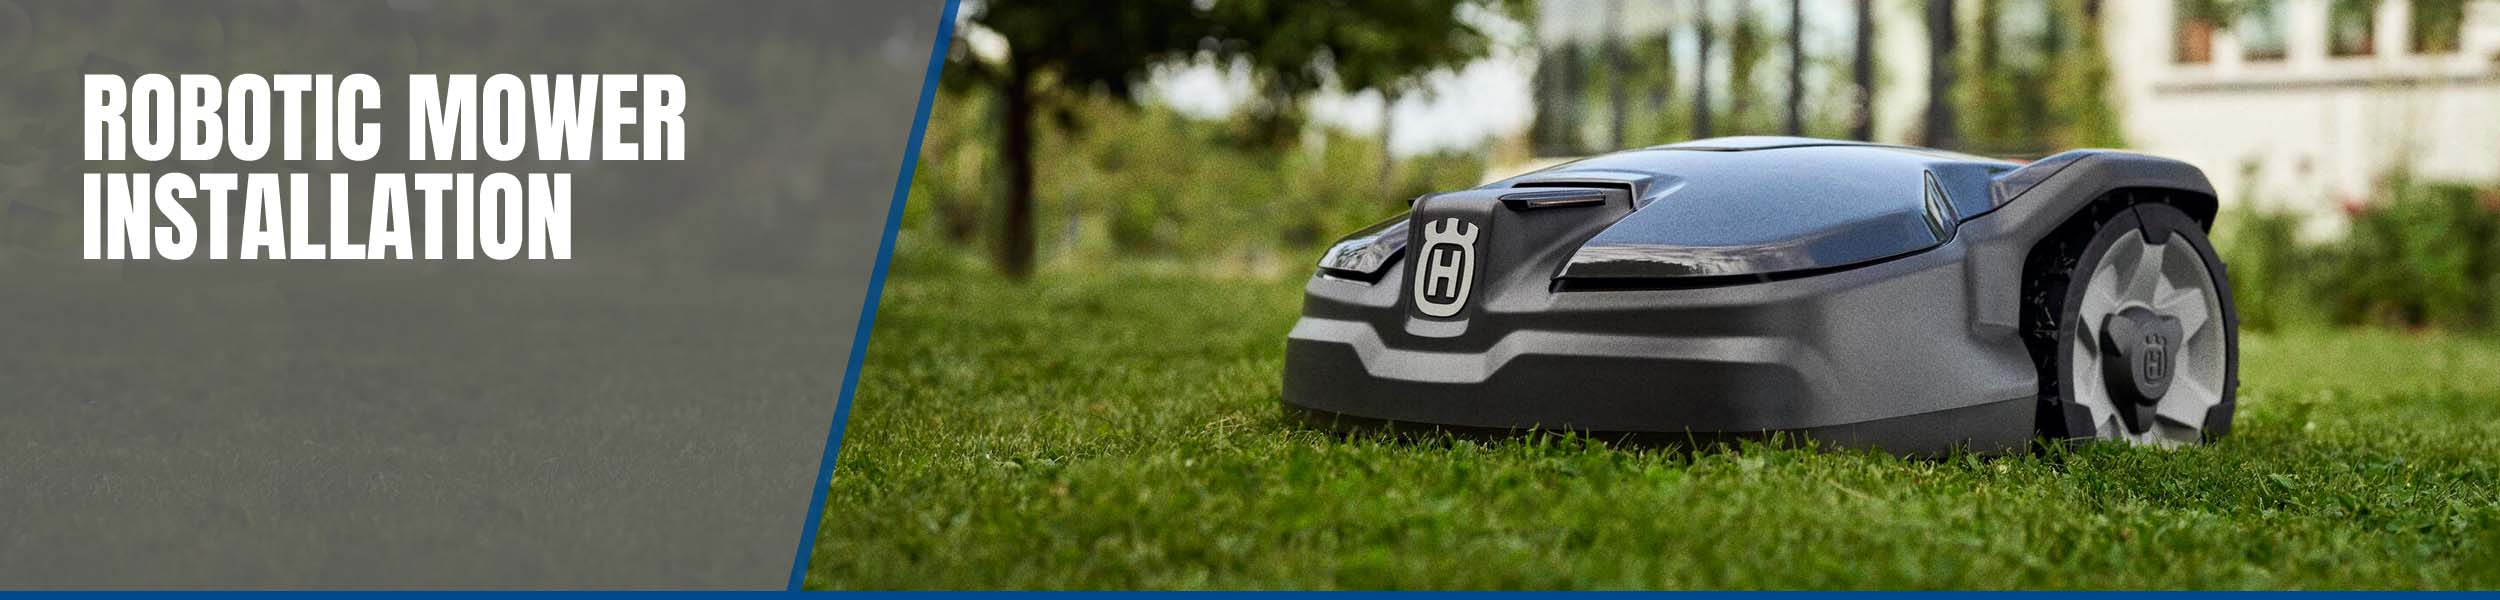 Robotic Mower Installation Available